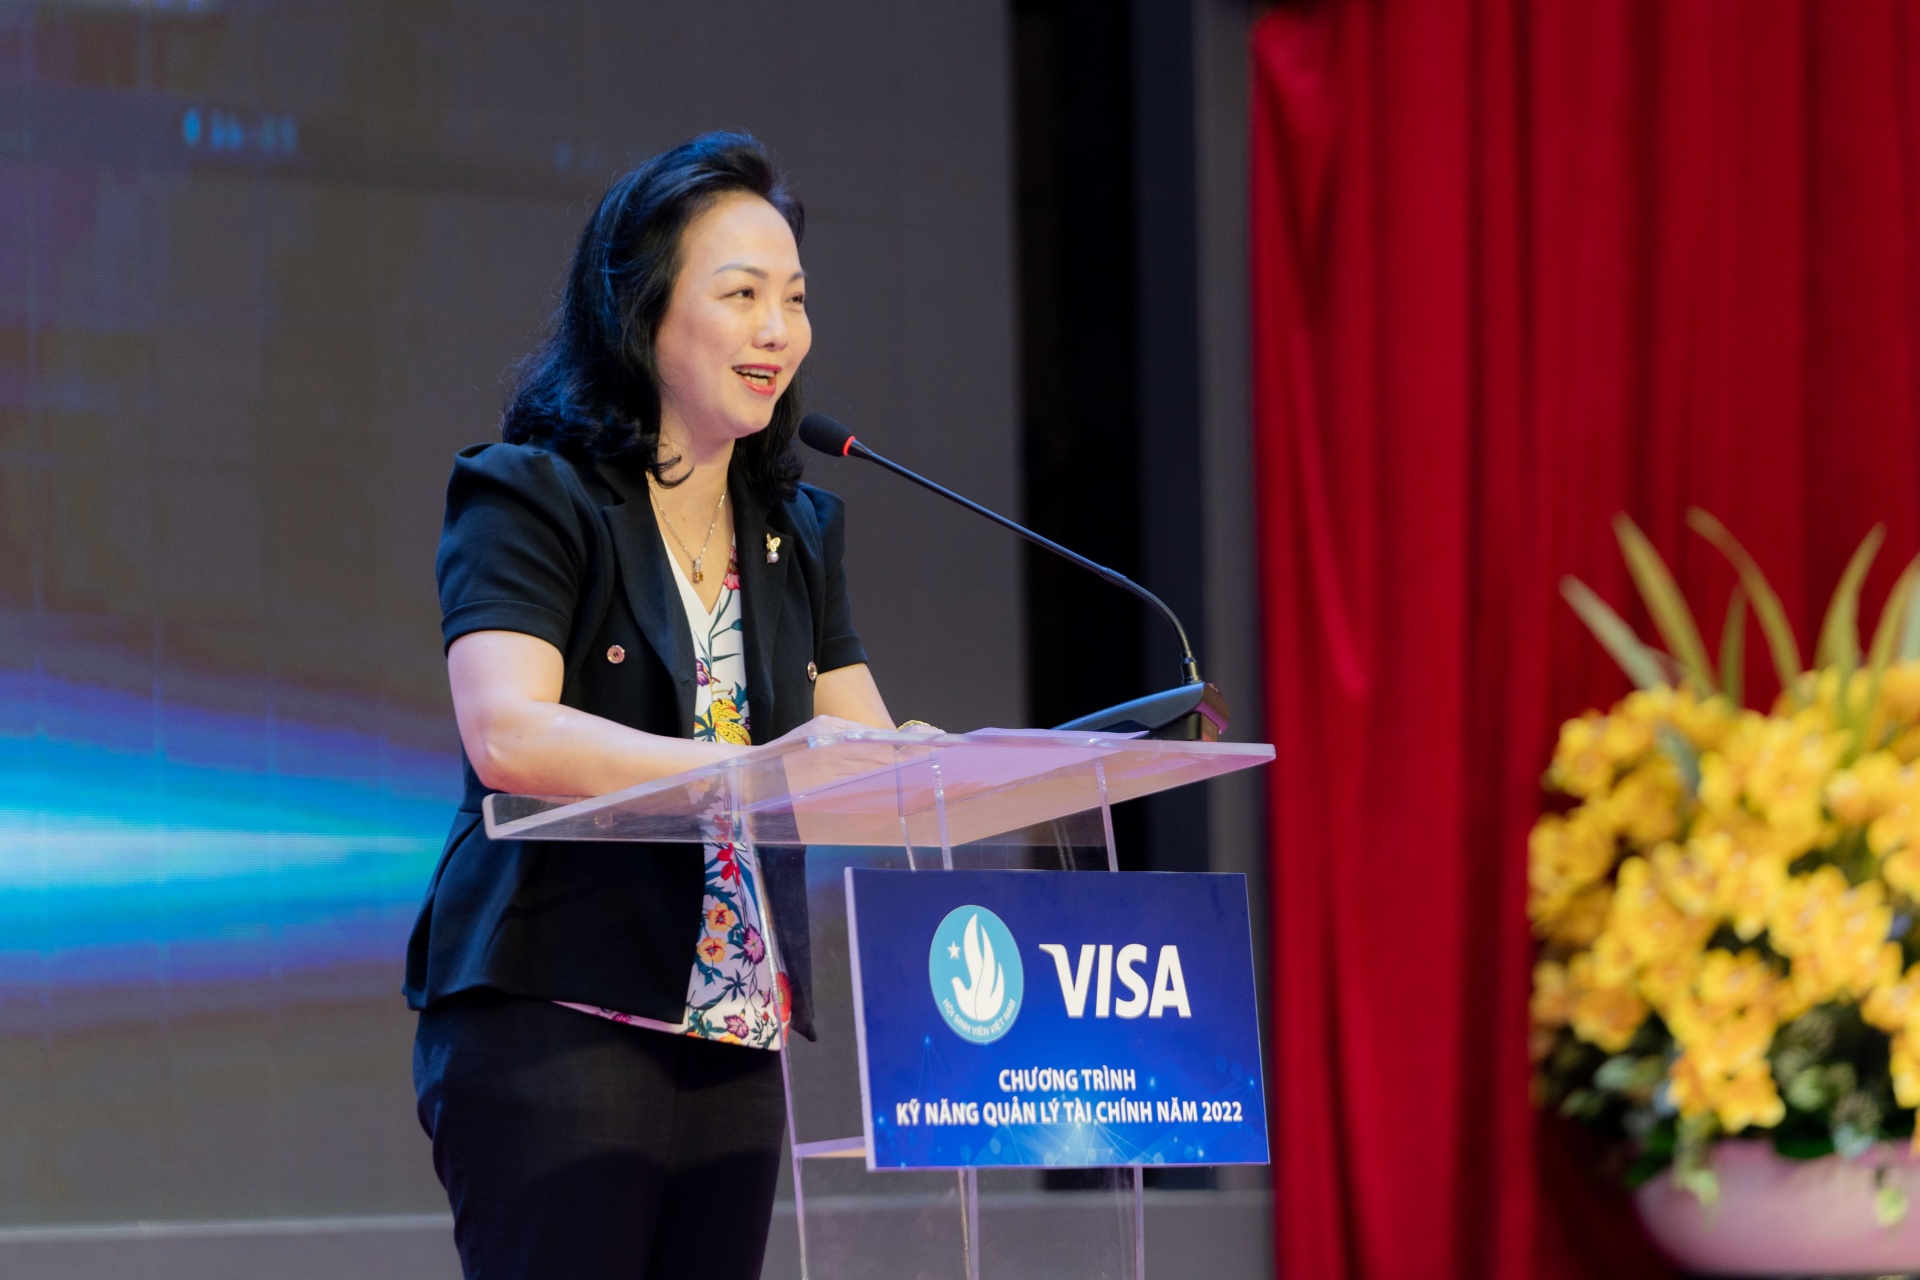 Students supercharge SMEs in Visa and CCVSA’s Financial Literacy programme